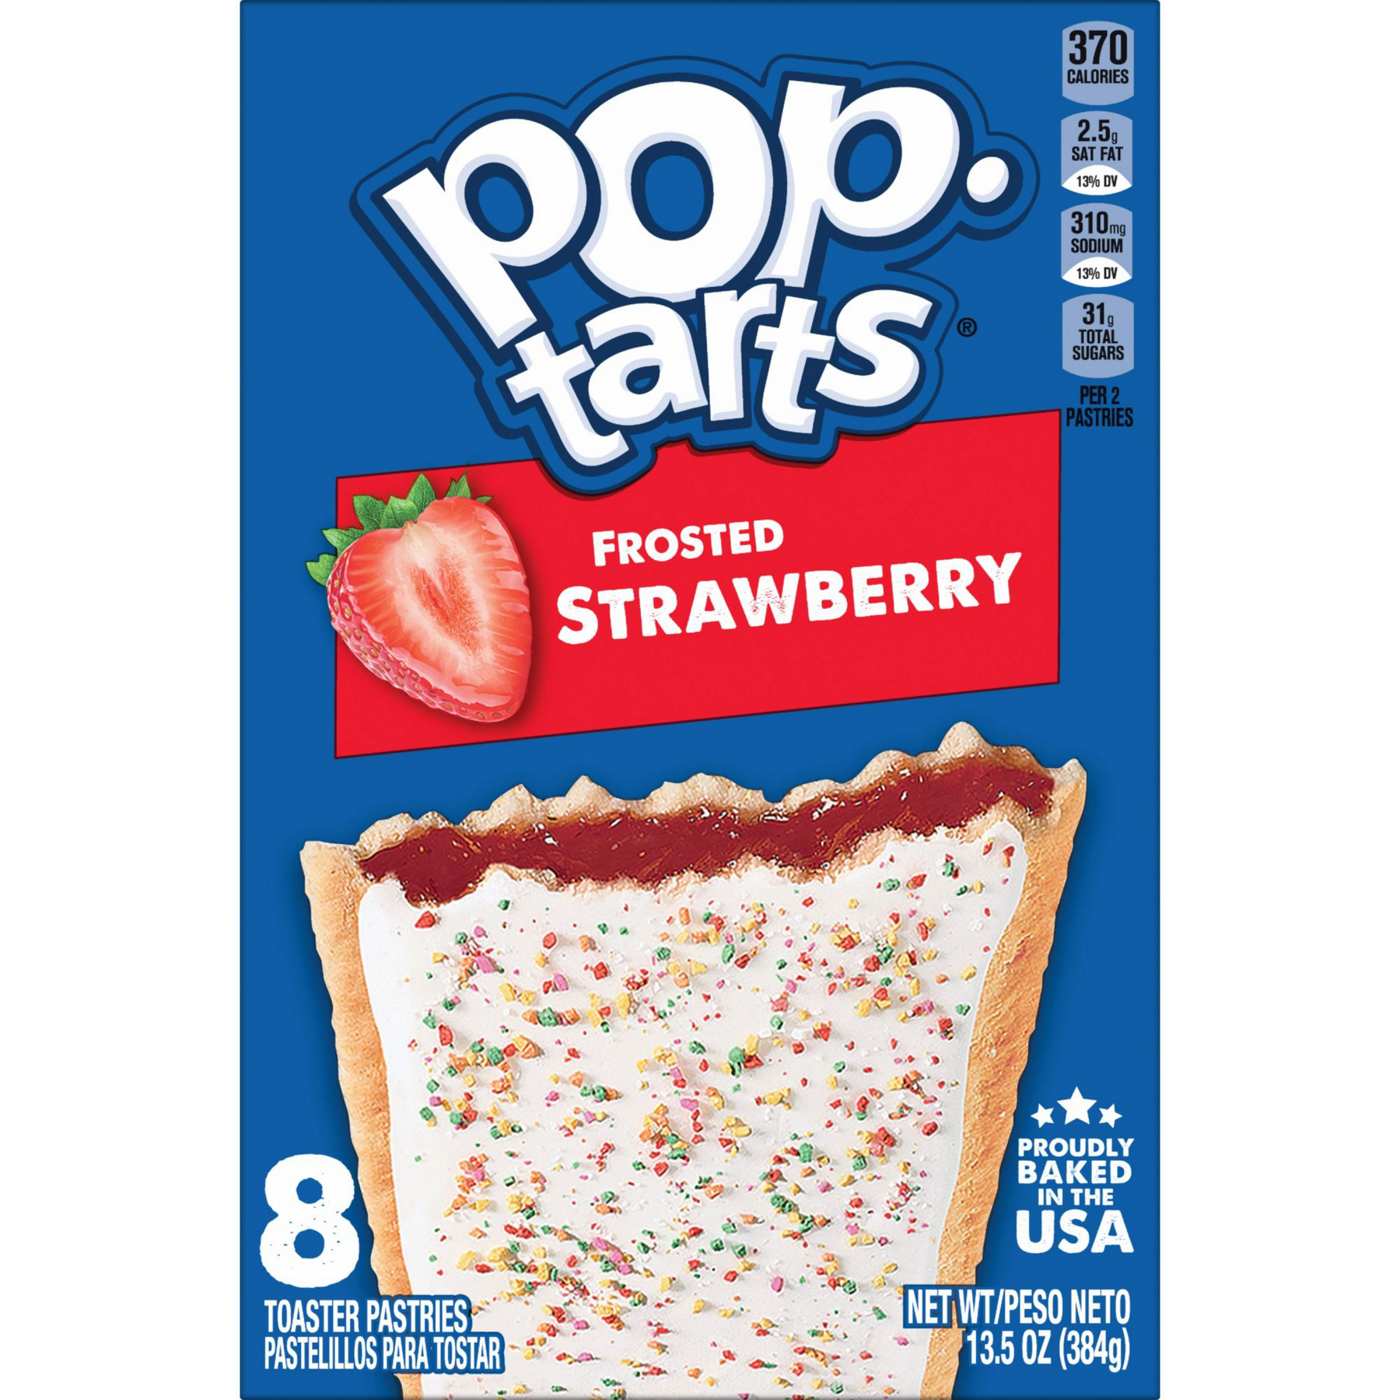 Pop-Tarts Frosted Strawberry Toaster Pastries; image 1 of 6